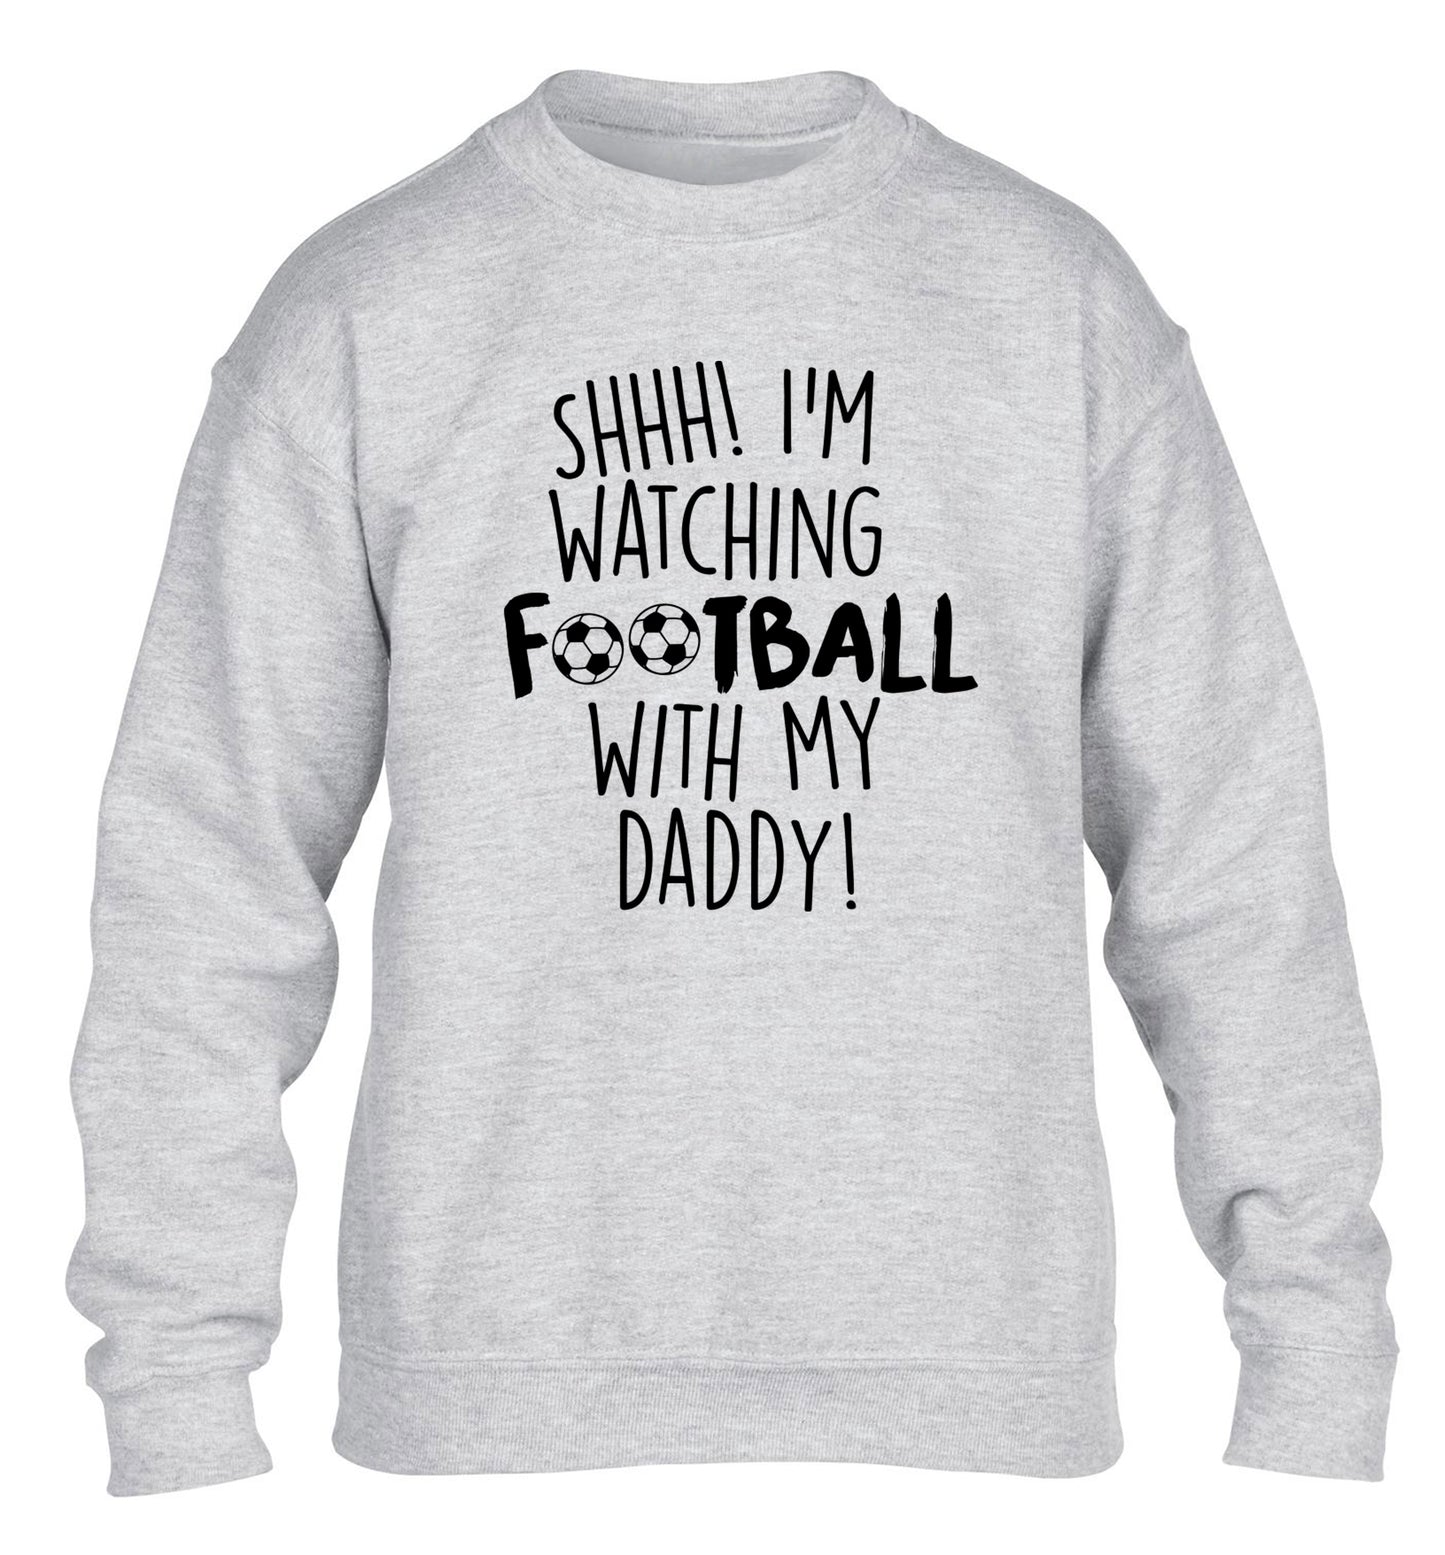 Shhh I'm watching football with my daddy children's grey sweater 12-14 Years